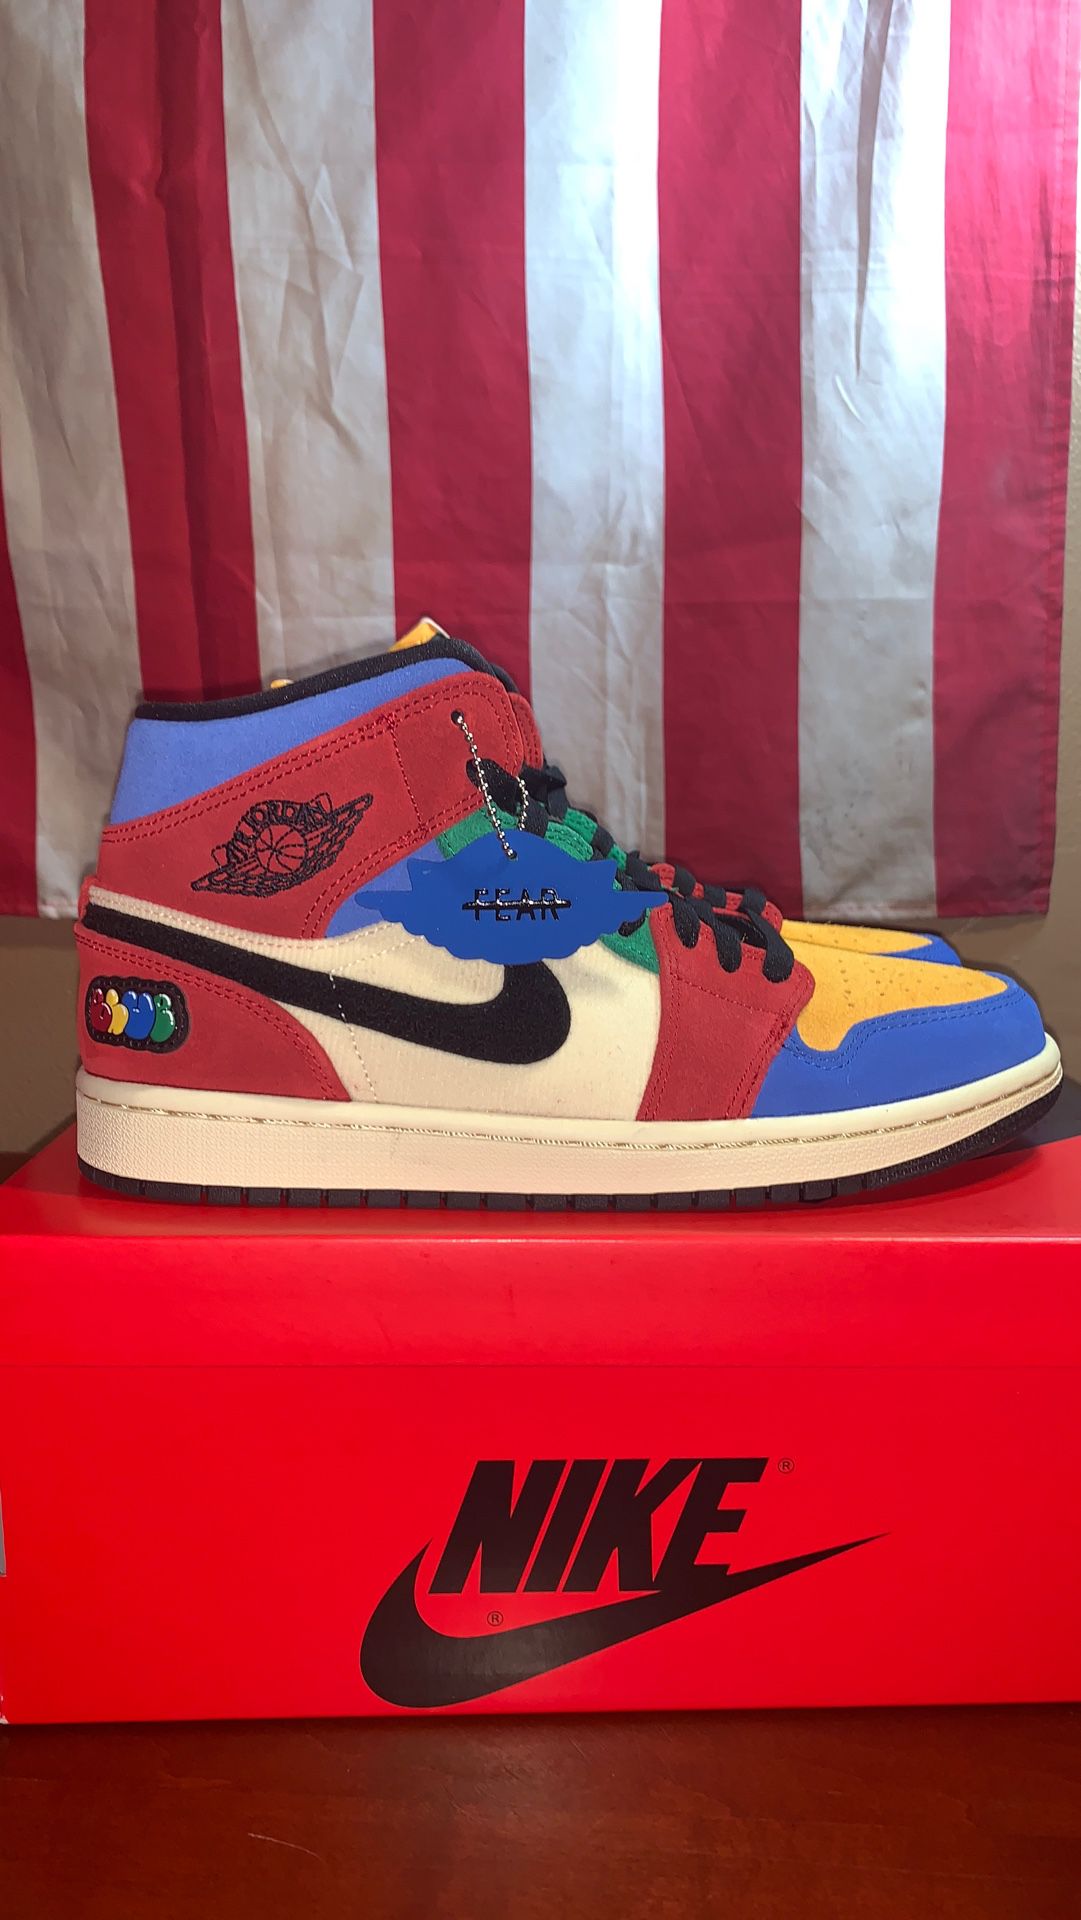 NIKE AIR JORDAN 1 MID SE FRLS NA “BLUE THE GREAT” LIMITED EXCLUSIVE